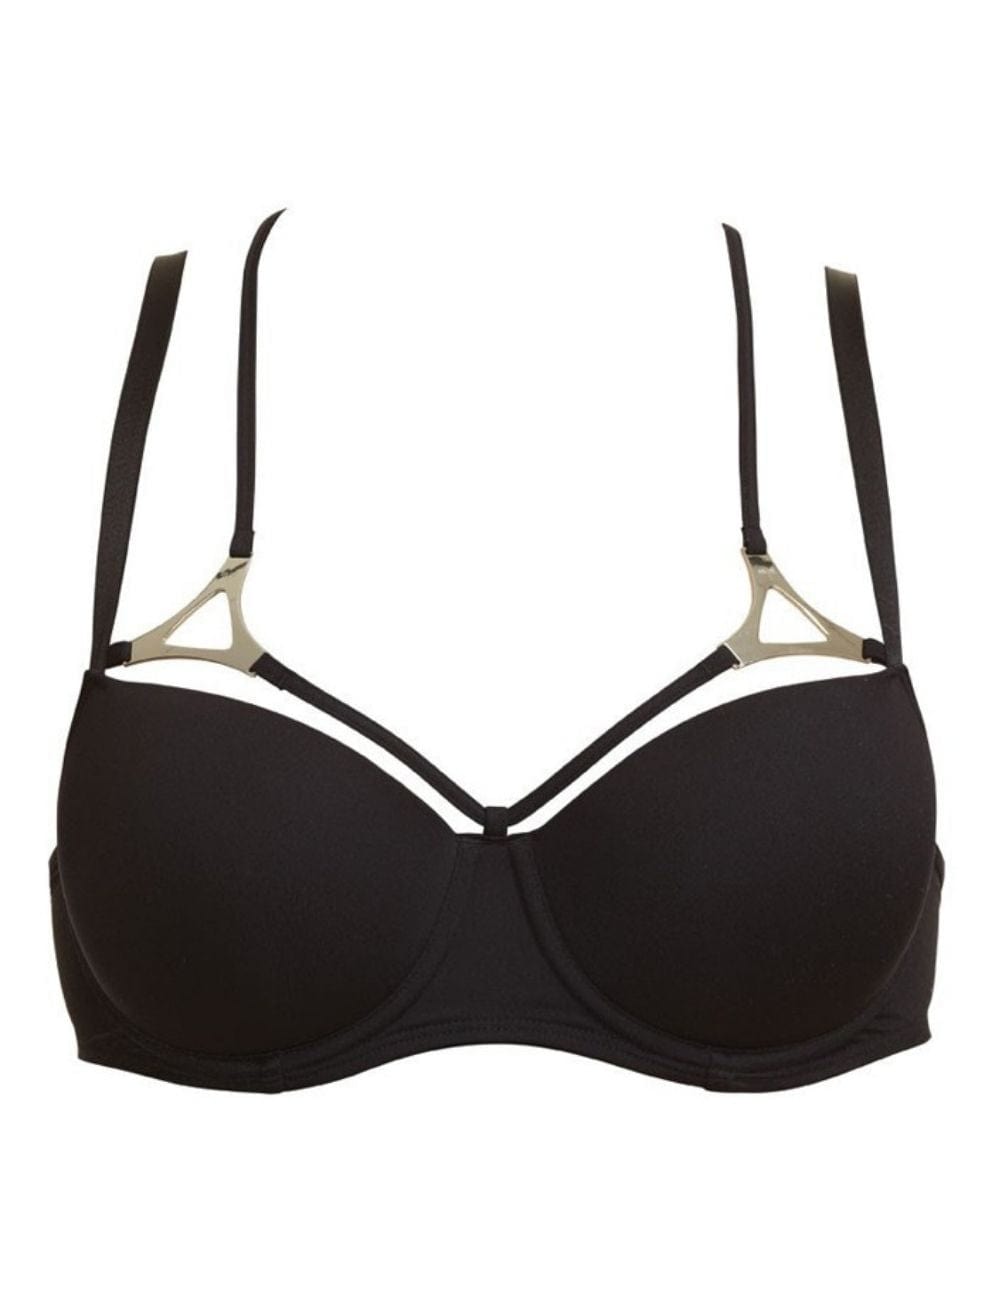 Marlies Dekkers Space Odyssey balcony bra BLACK buy for the best price CAD$  115.00 - Canada and U.S. delivery – Bralissimo